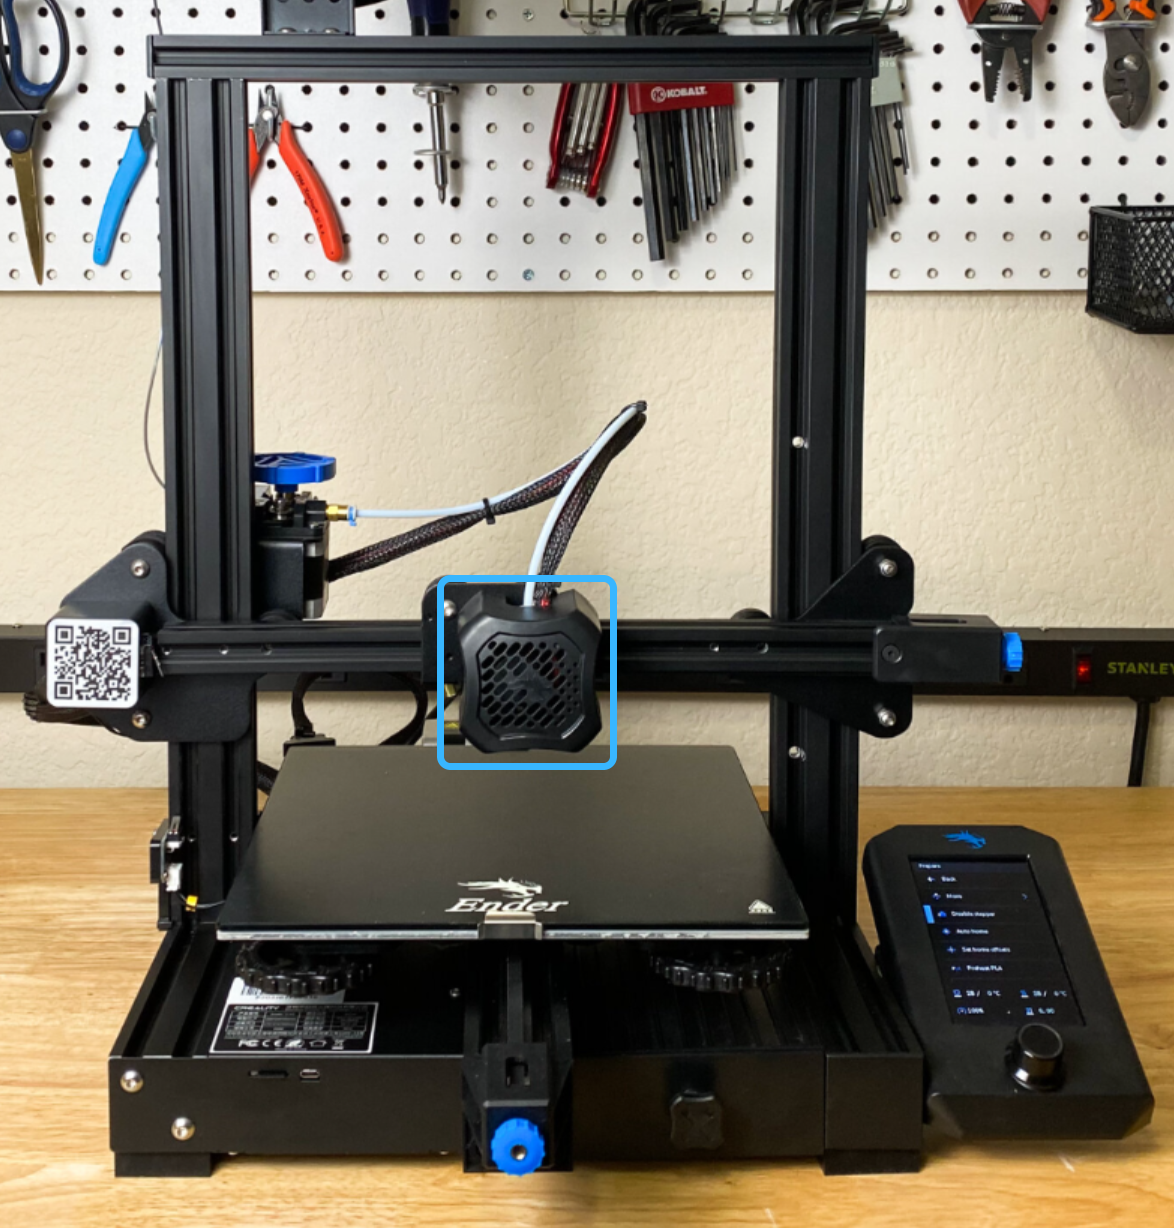 Creality Hot End Repair and Parts Guide for Ender 3, CR-10, and other  Creality 3D printers — Creality Experts